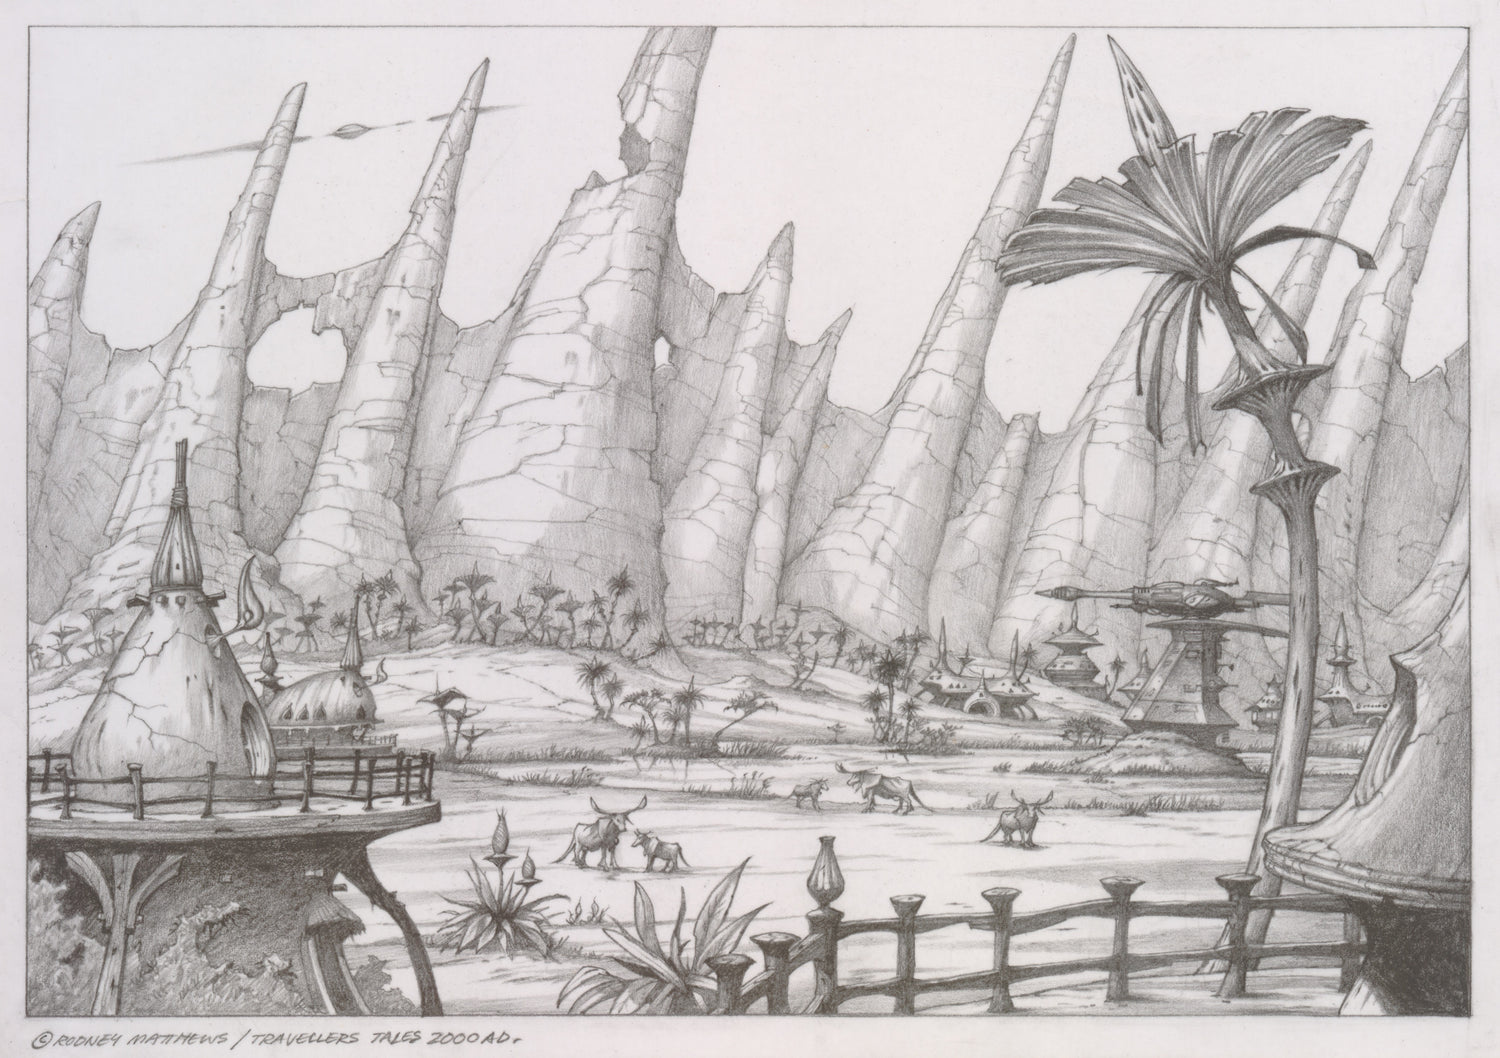 Defended Village (Haven - The Call of the King) original pencil sketch by Rodney Matthews